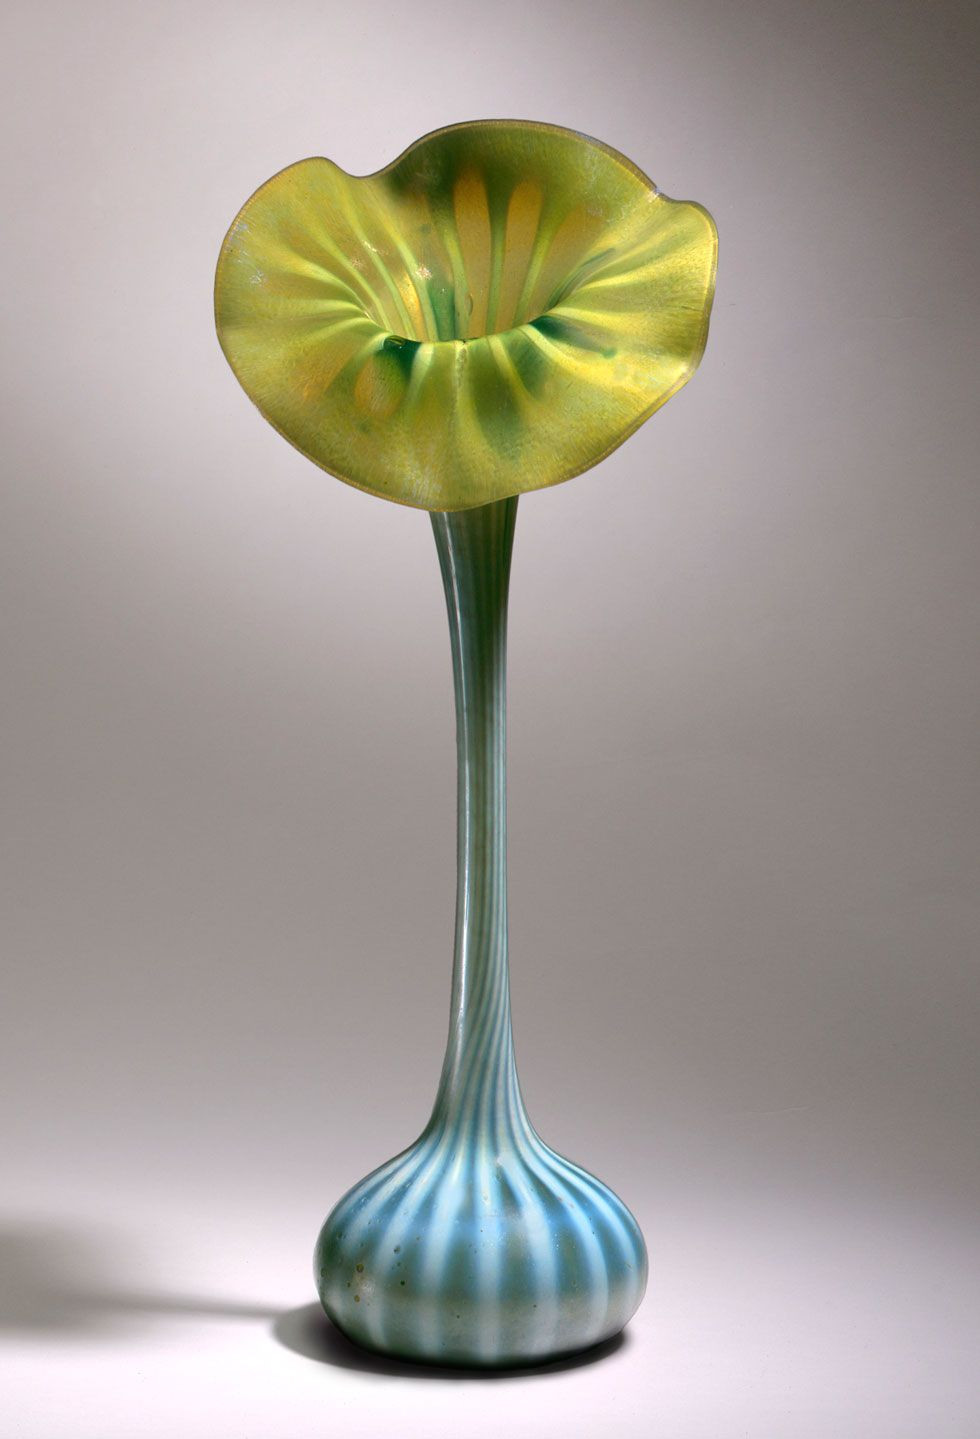 20 Spectacular Tiffany Tulip Vase 2024 free download tiffany tulip vase of vase c 1899 onion blown glass tiffany glass and decorating intended for vase c 1899 onion blown glass tiffany glass and decorating company